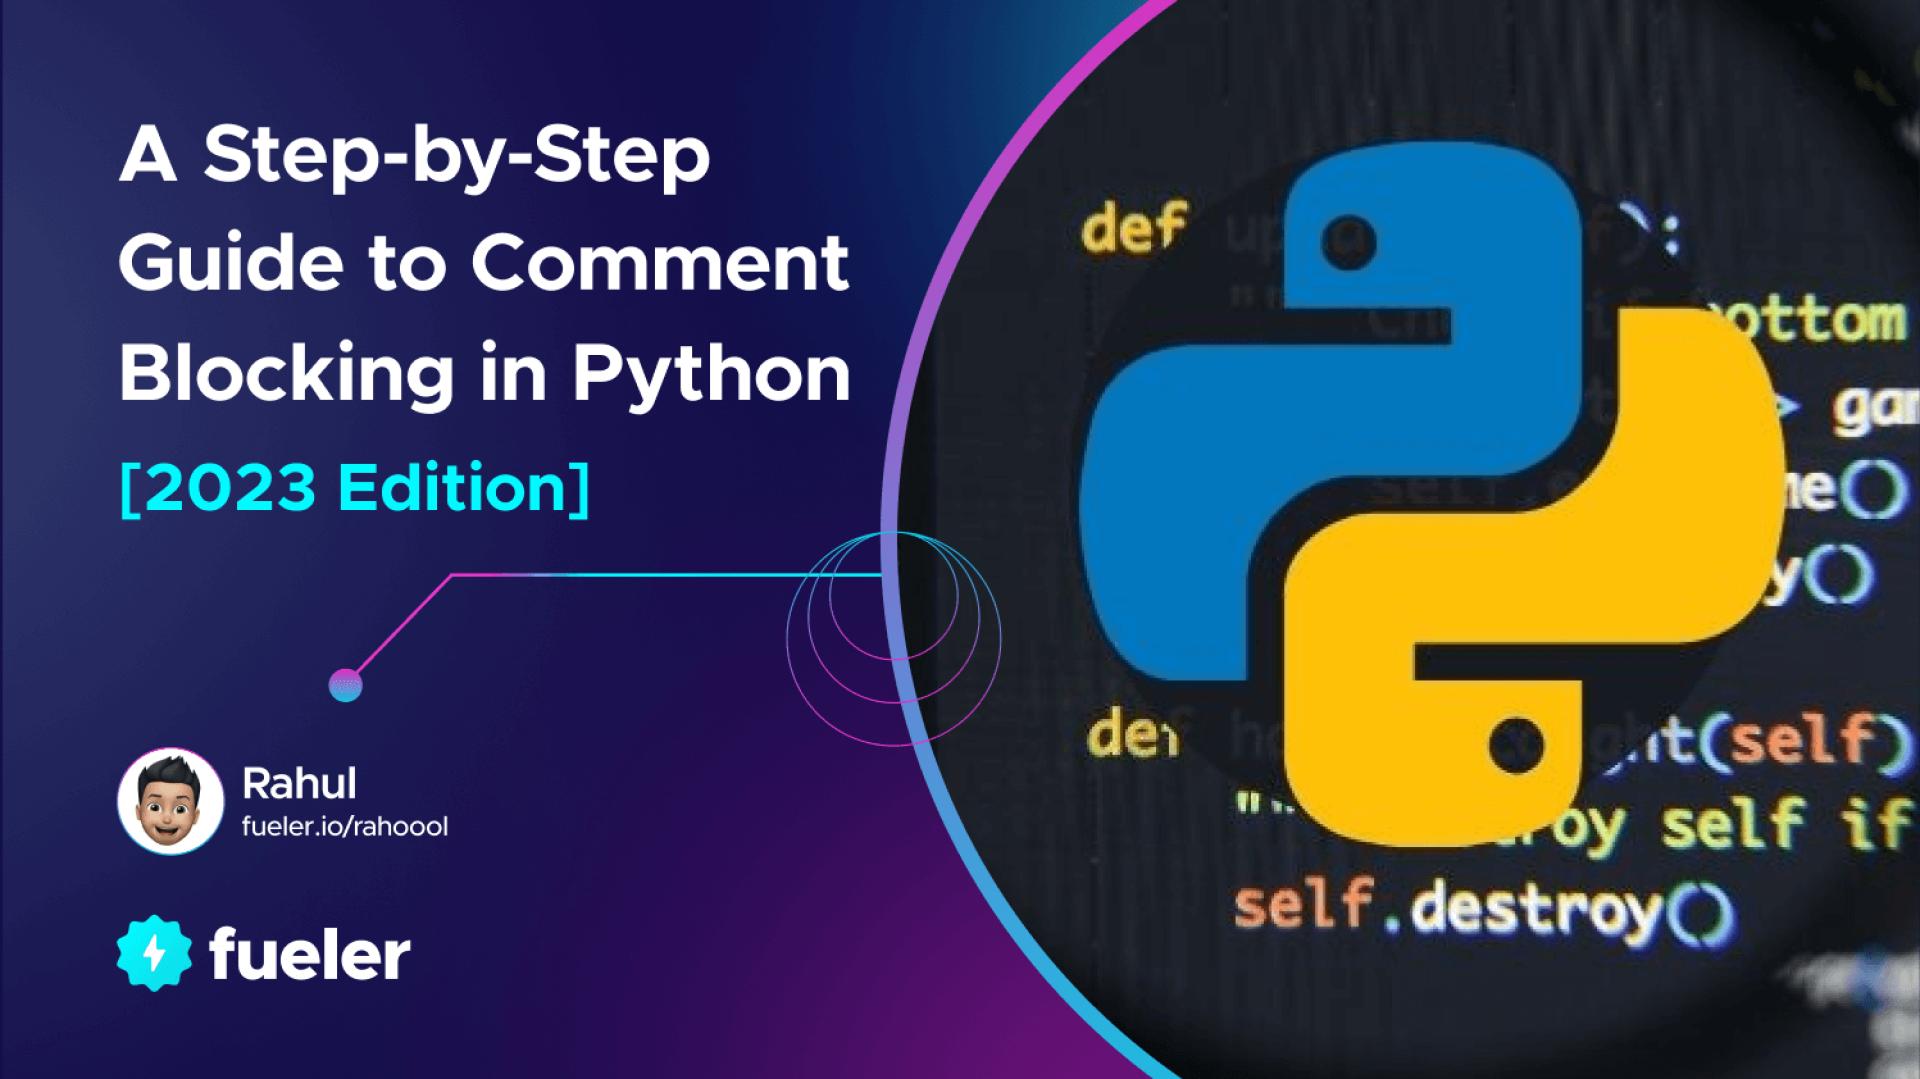 A Step-by-Step Guide to Comment Blocking in Python